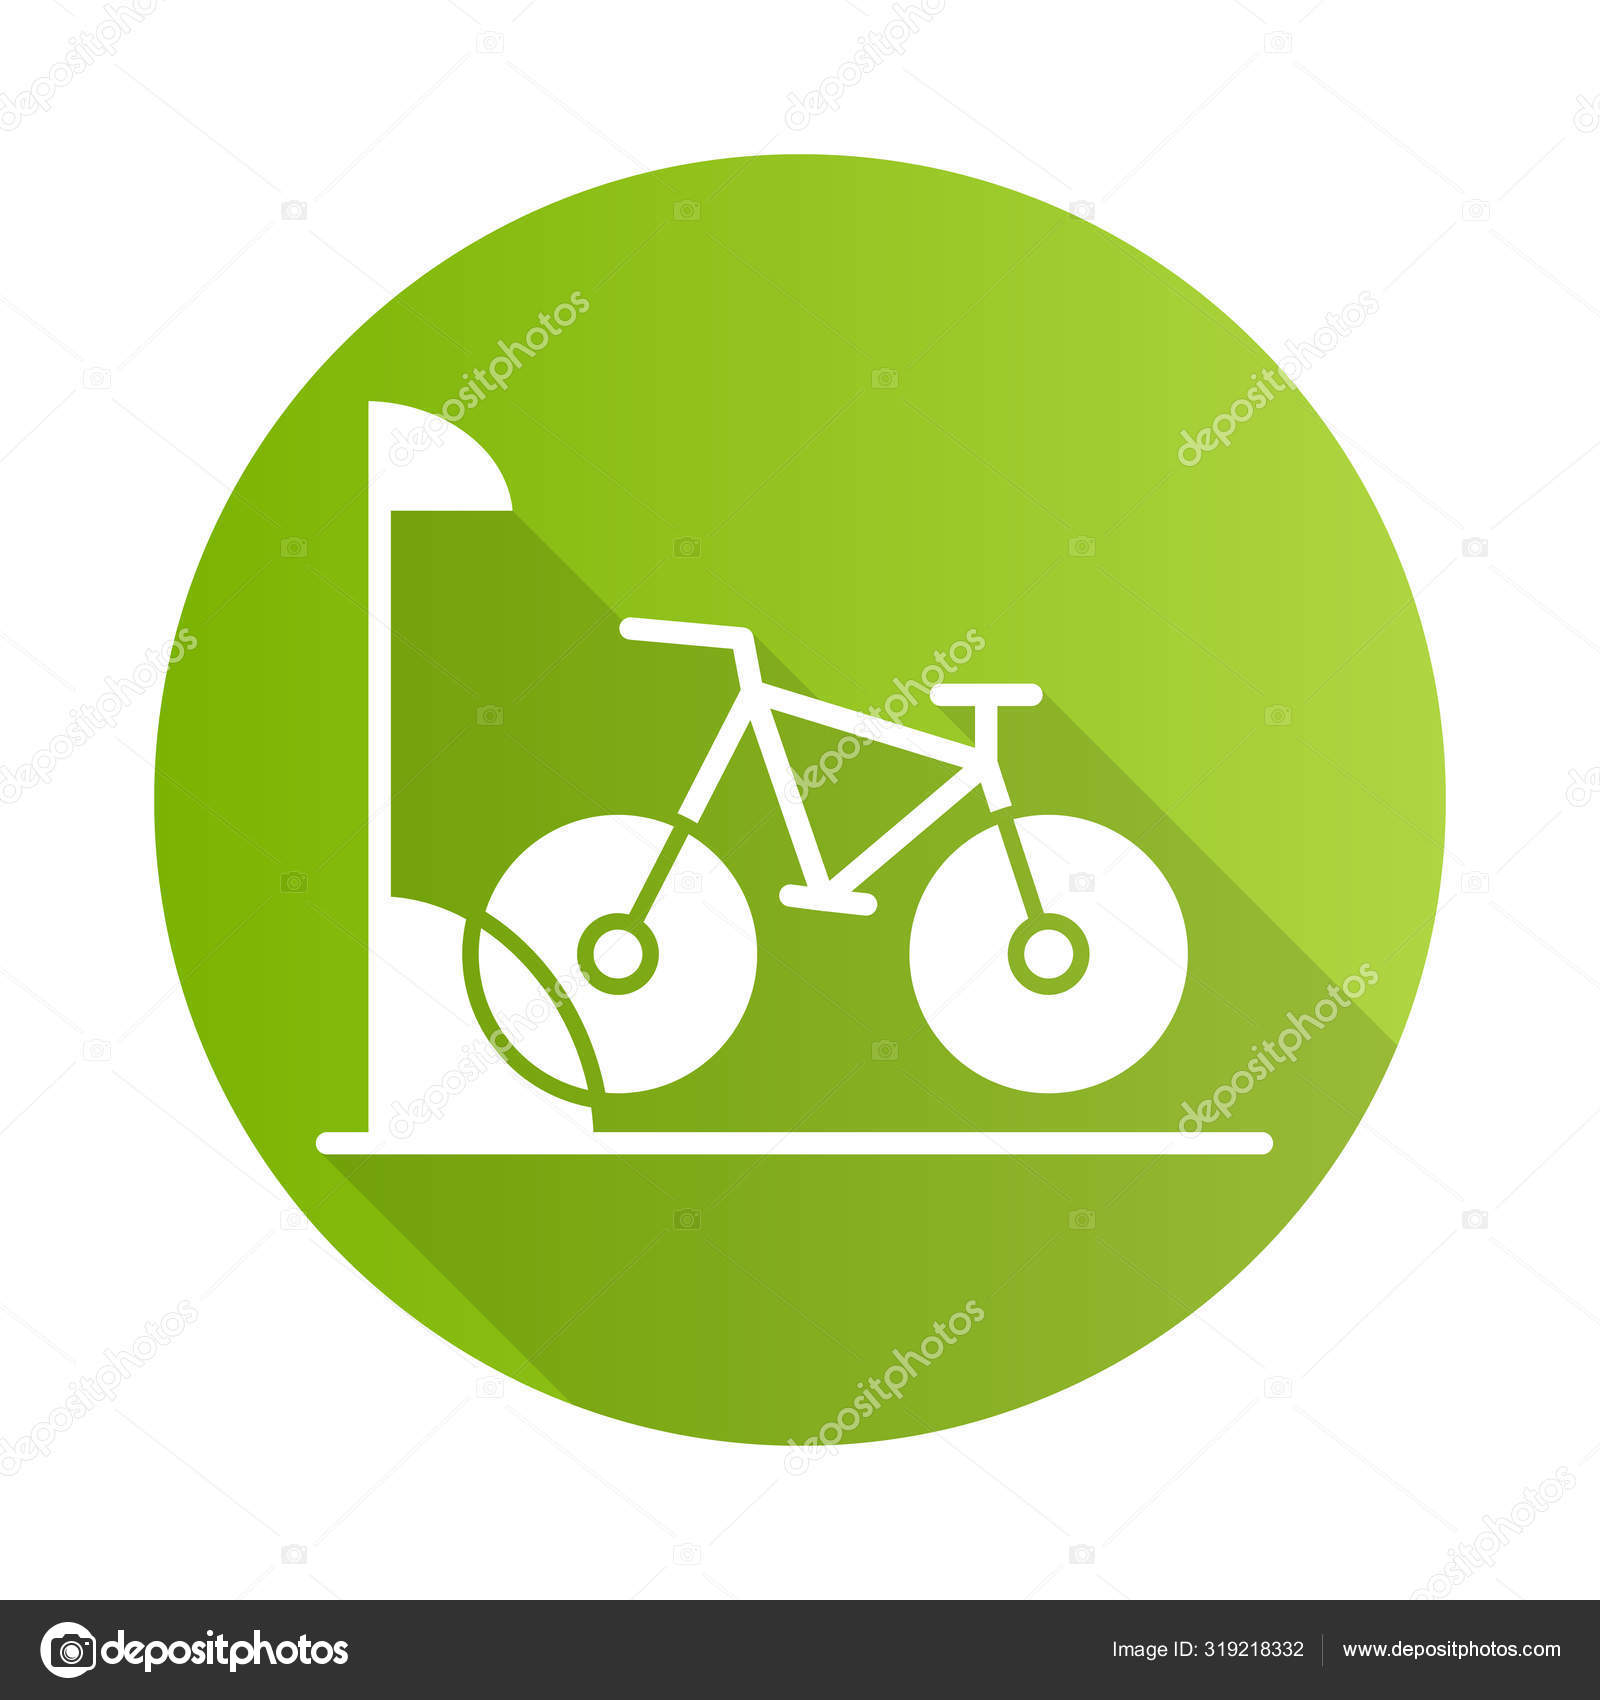 design　Vector　Stock　parking　s　Bicycle　icon.　glyph　shadow　long　flat　green　Bike　319218332　by　©bsd_studio